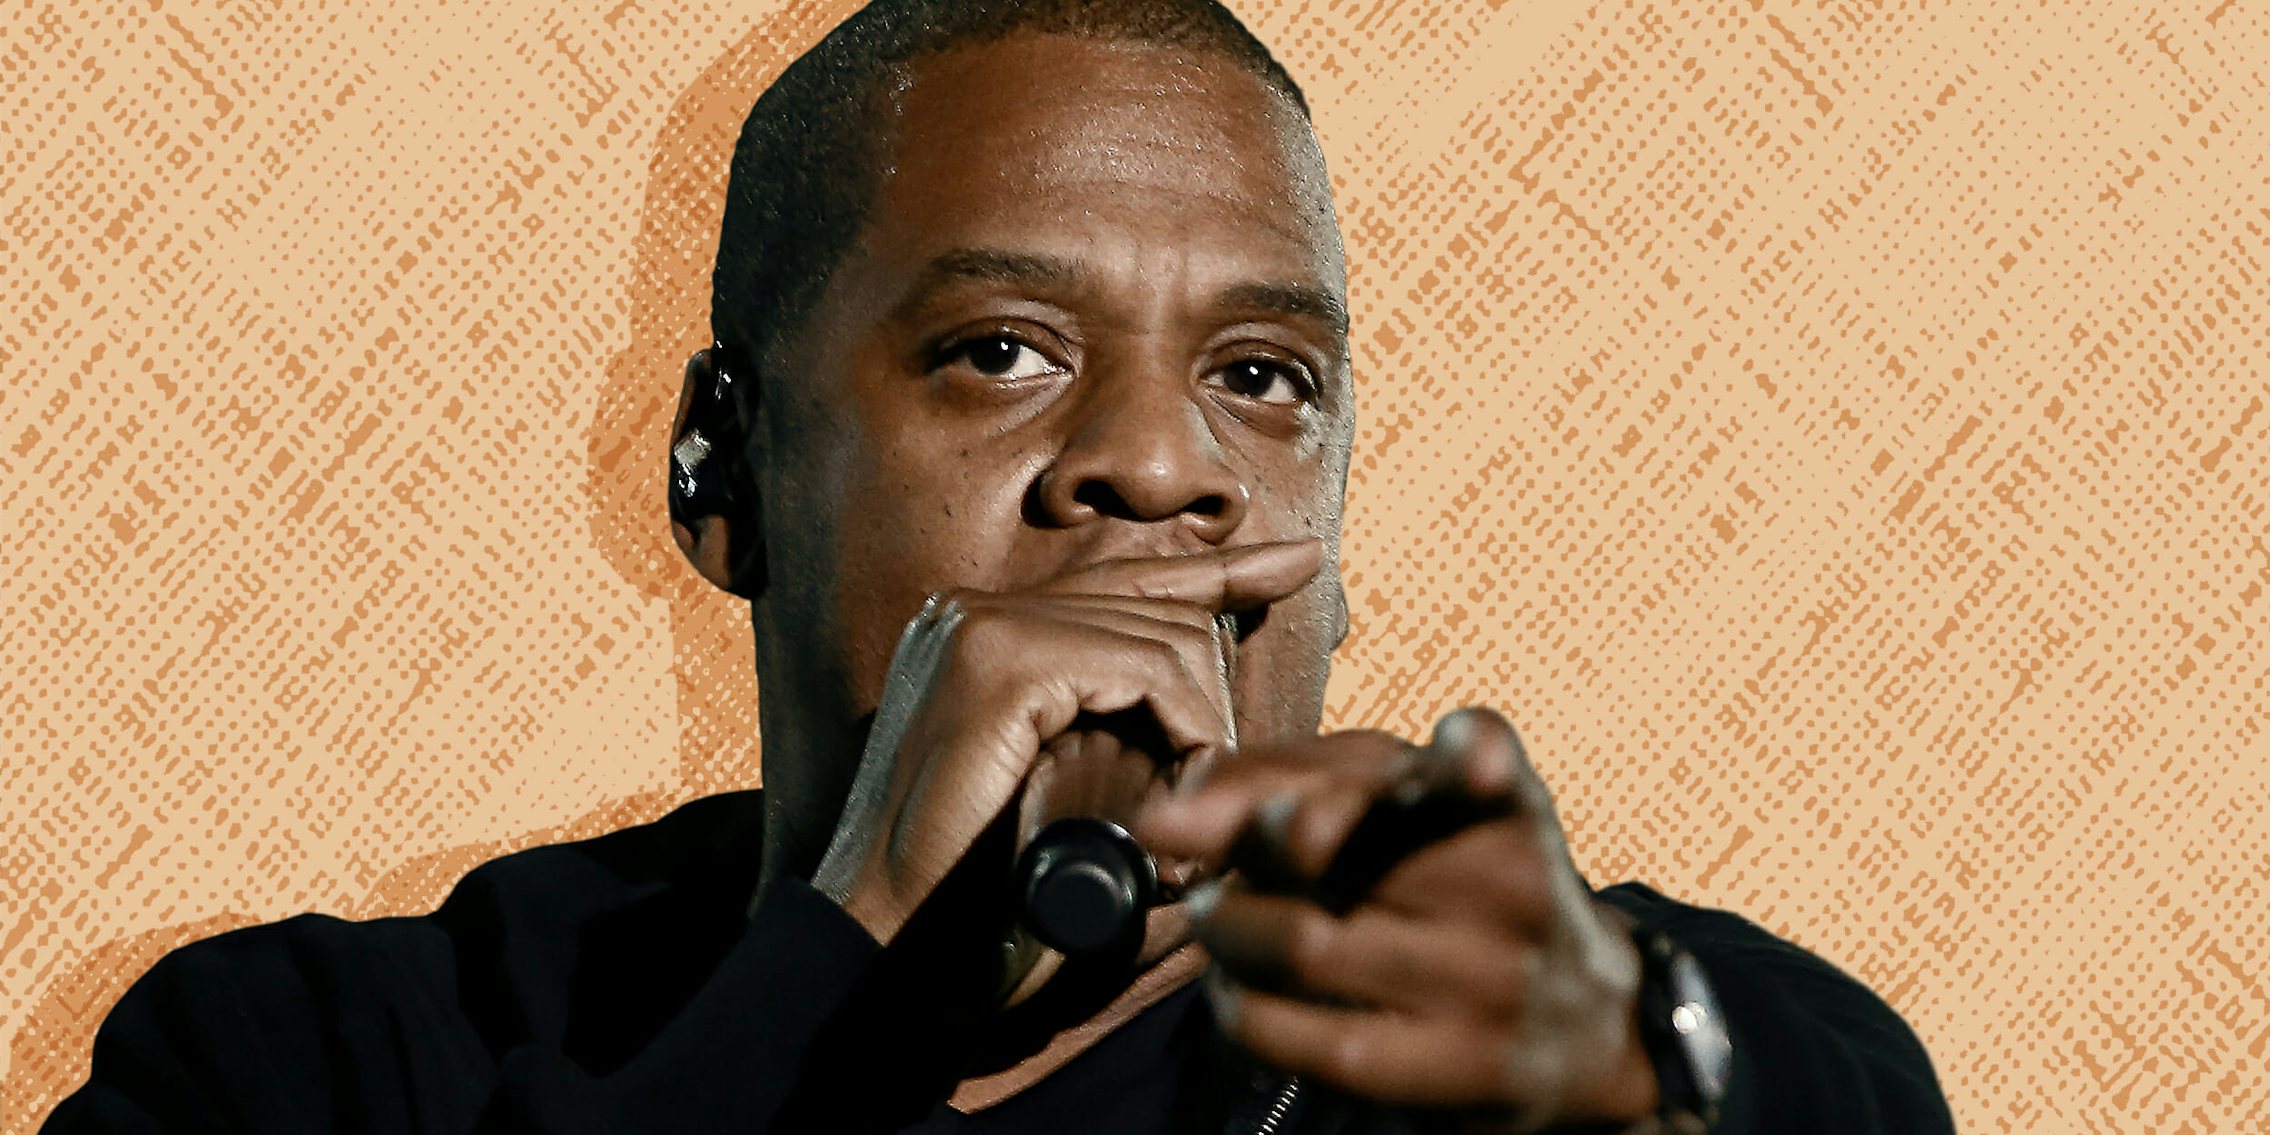 Jay-Z performing and pointing to the camera